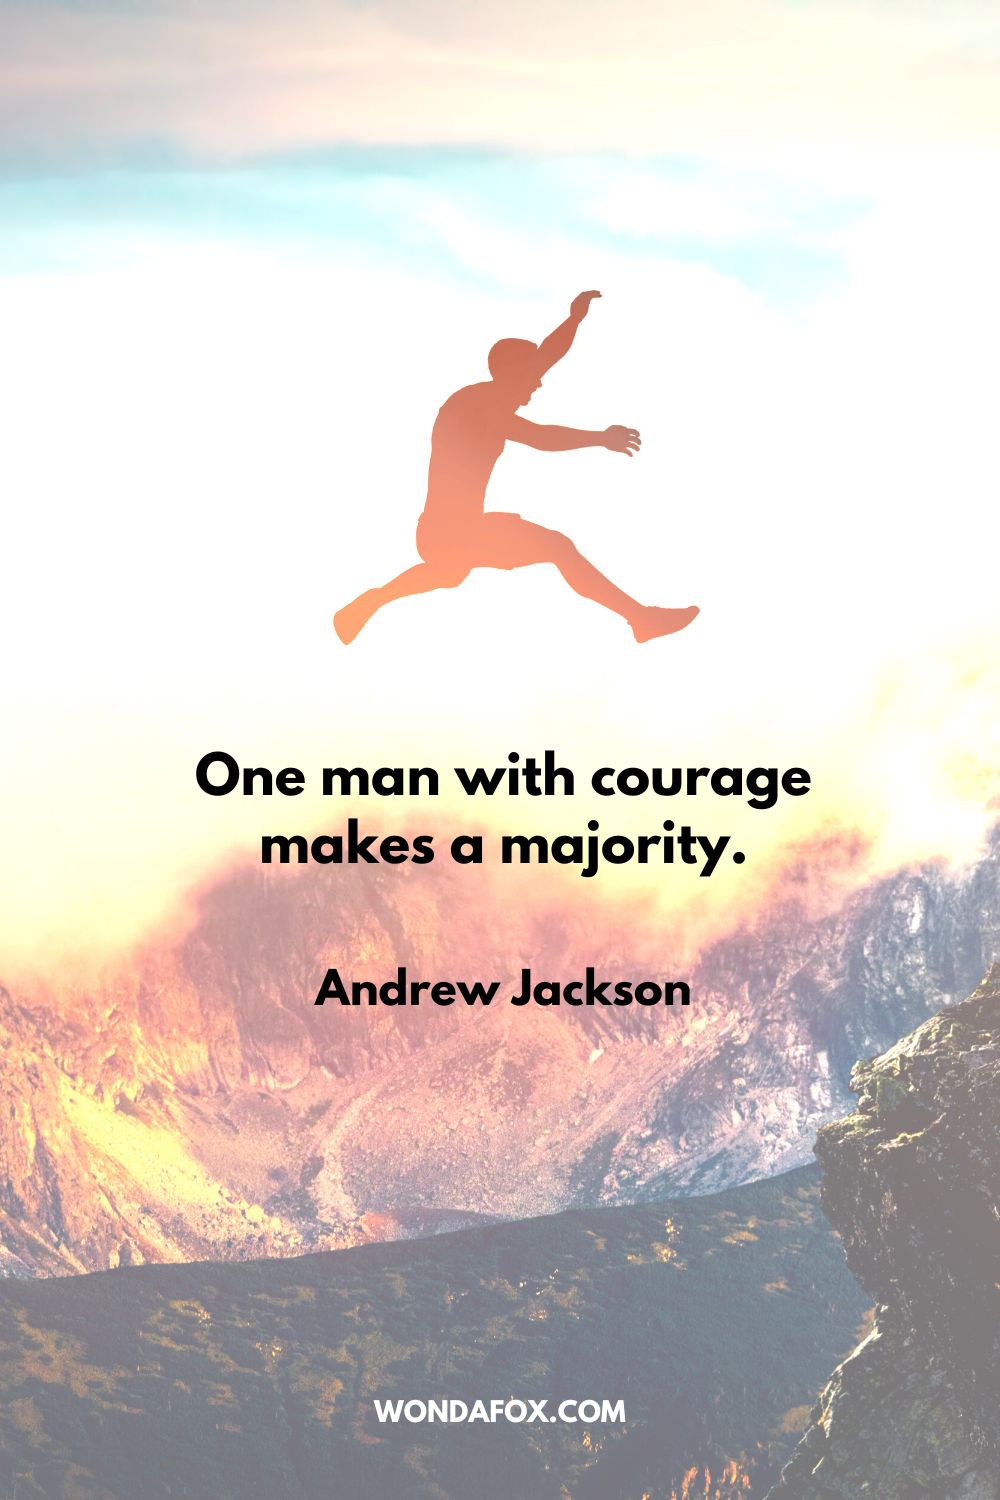 “One man with courage makes a majority. Andrew Jackson